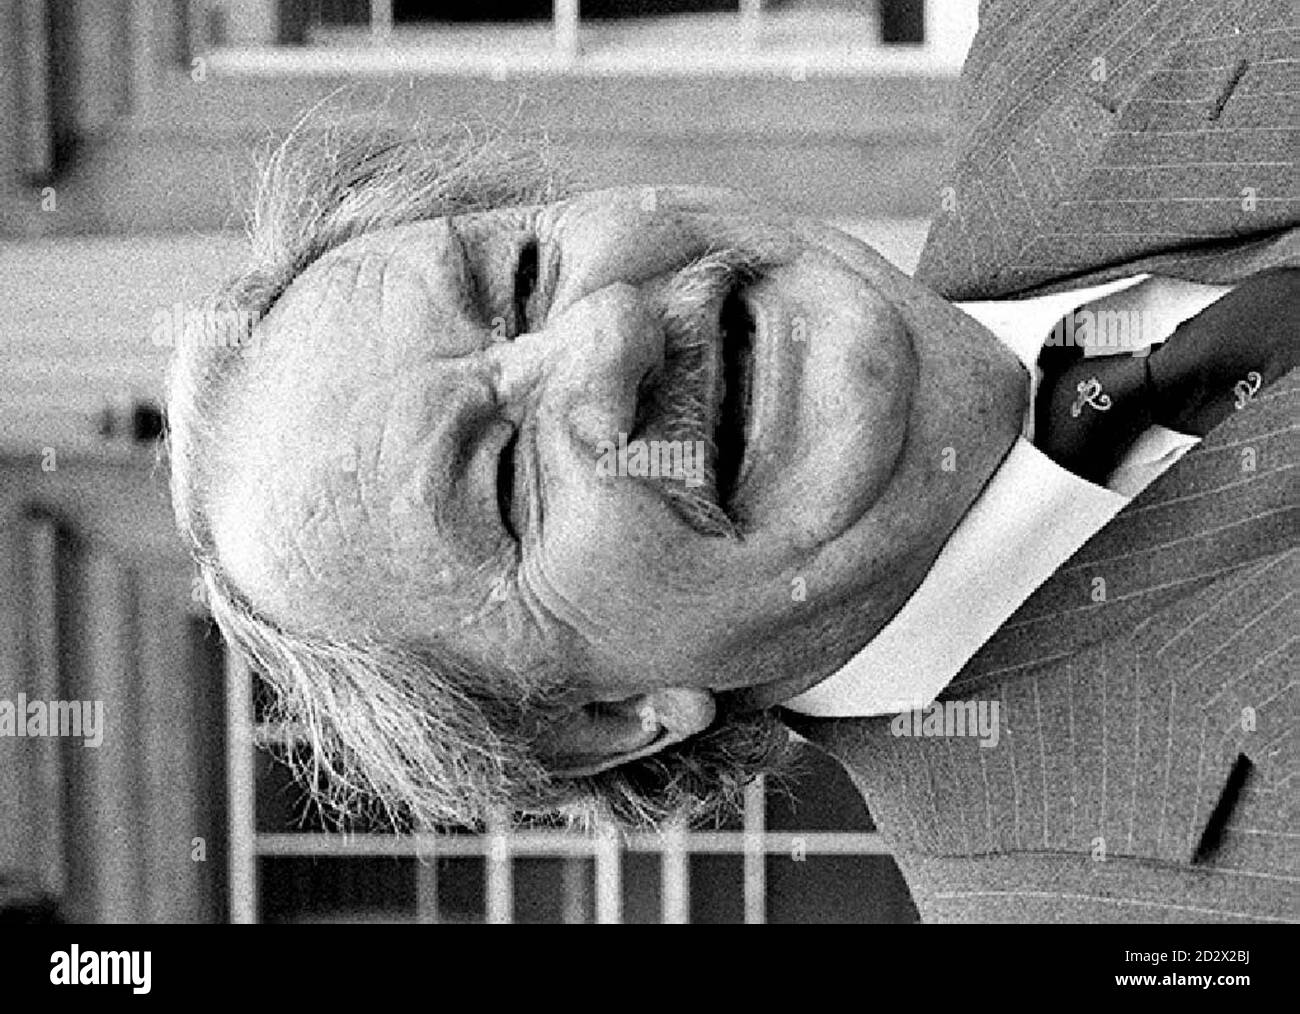 Actor Leo Mckern who  celebrates his 76th birthday on Saturday 16th March 1996.   * 16/12/02 Actor Leo McKern who was being remembered, at a memorial service being held at  the actors  church  of St Paul s in Covent Garden, central London. McKern died in July at the age of 82 at a nursing home near his home in Bath. The Australian-born actor enjoyed a distinguished stage, film and TV career but was best known for playing the pugnacious barrister Rumpole. Rumpole creator Sir John Mortimer will give a reading at today s service, along with leading theatre director Sir Peter Hall and actress Elea Stock Photo